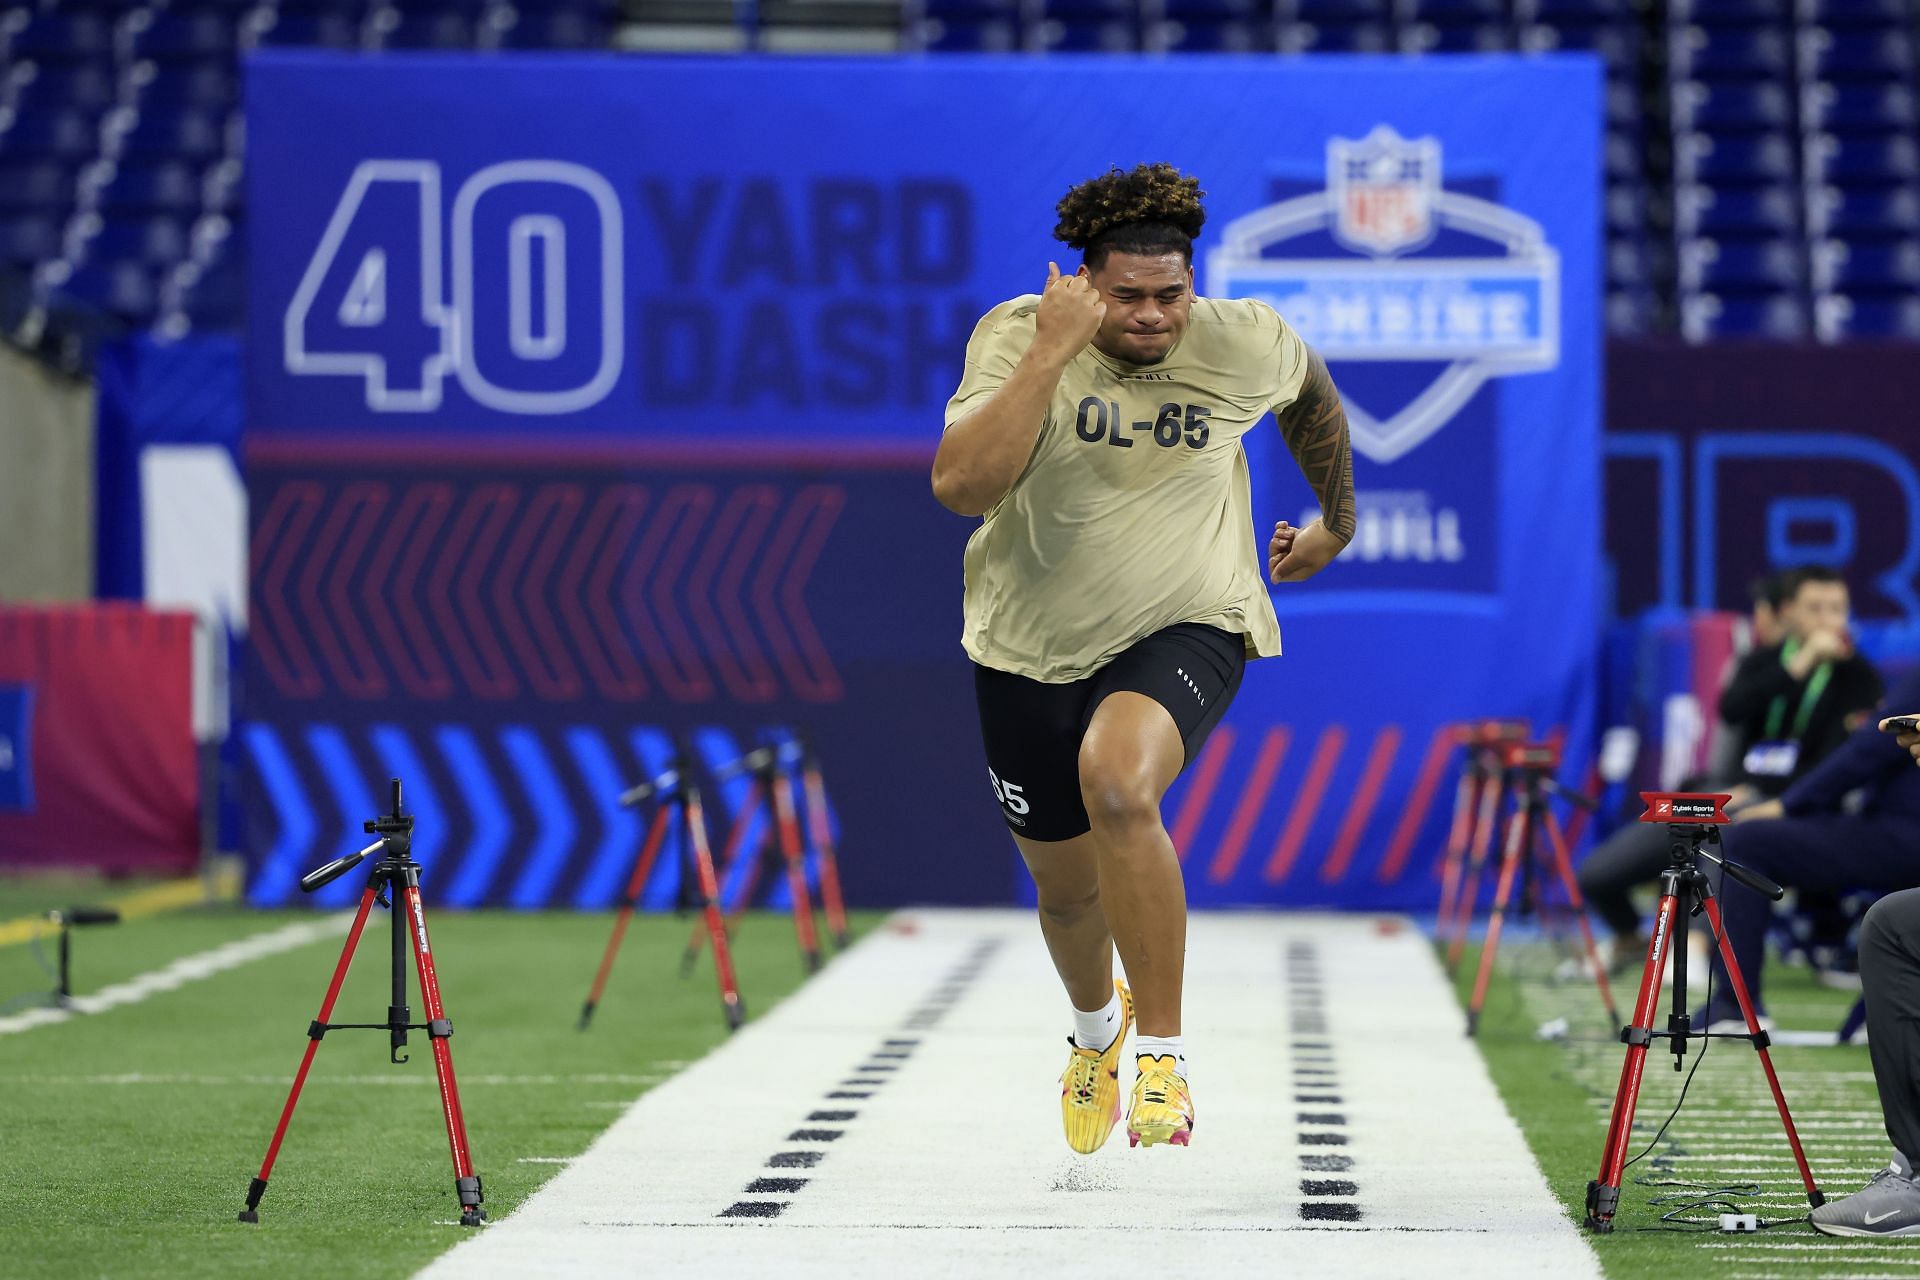 Kingsley Suamataia #OL65 of Brigham Young participates in the 40-yard dash during the NFL Combine 